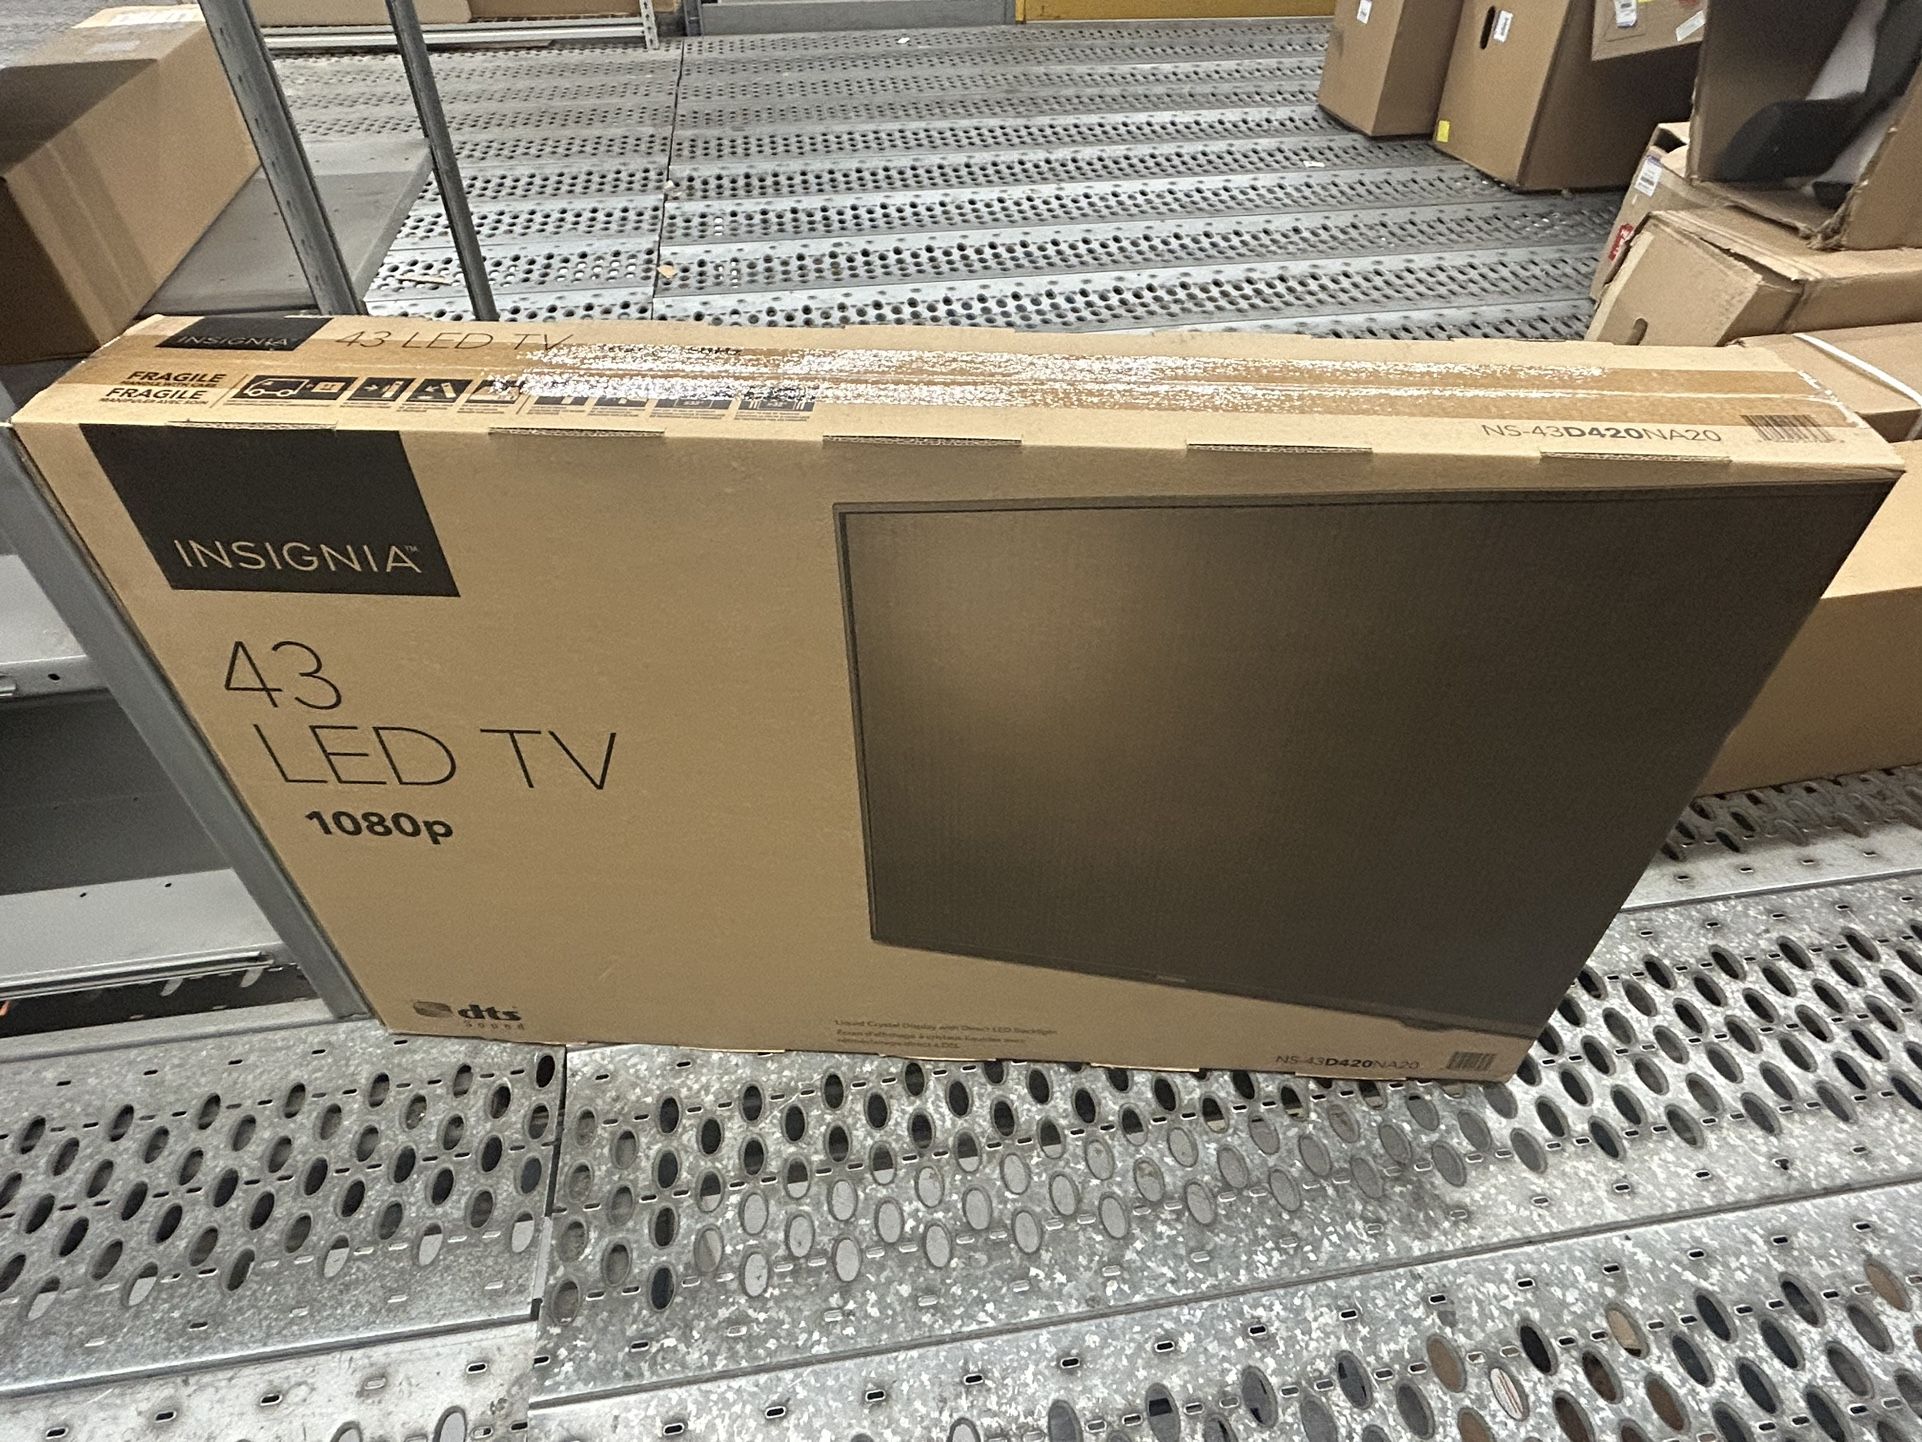 43 Inch LED PLASMA TV( BRAND NEW)! (ACCEPTING OFFERS NOT FREE)